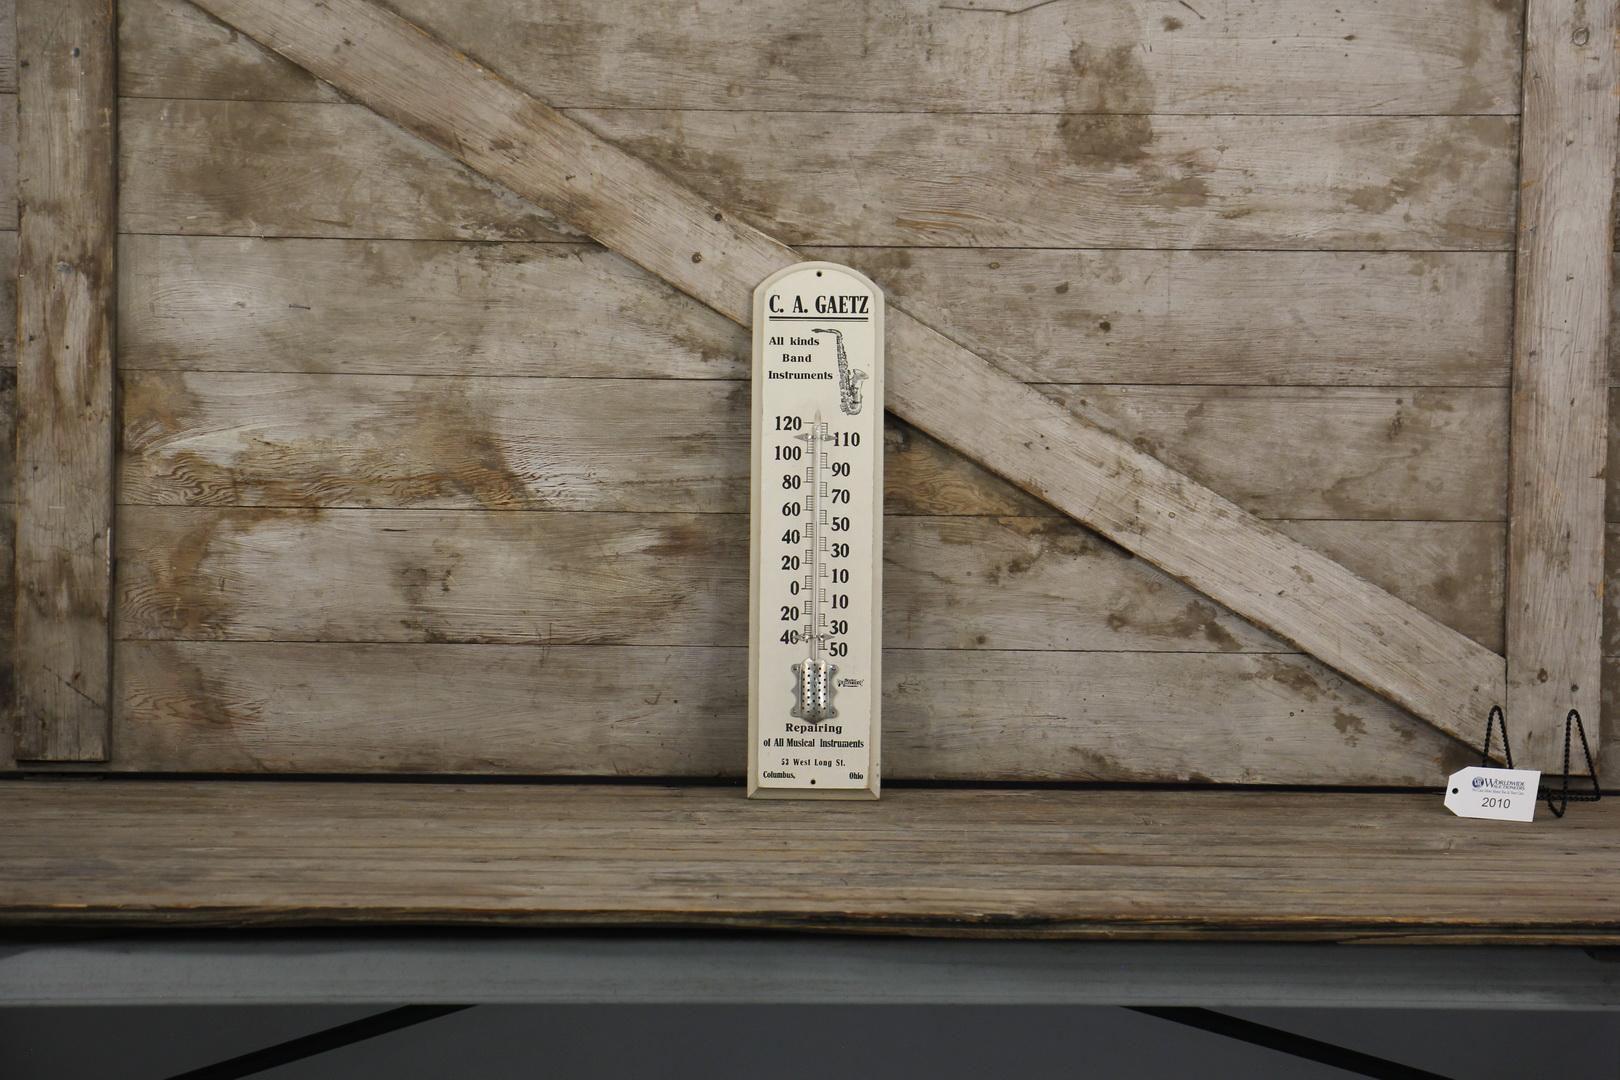 C.A. GAETZ Band Instruments Advertising Thermometer Sign